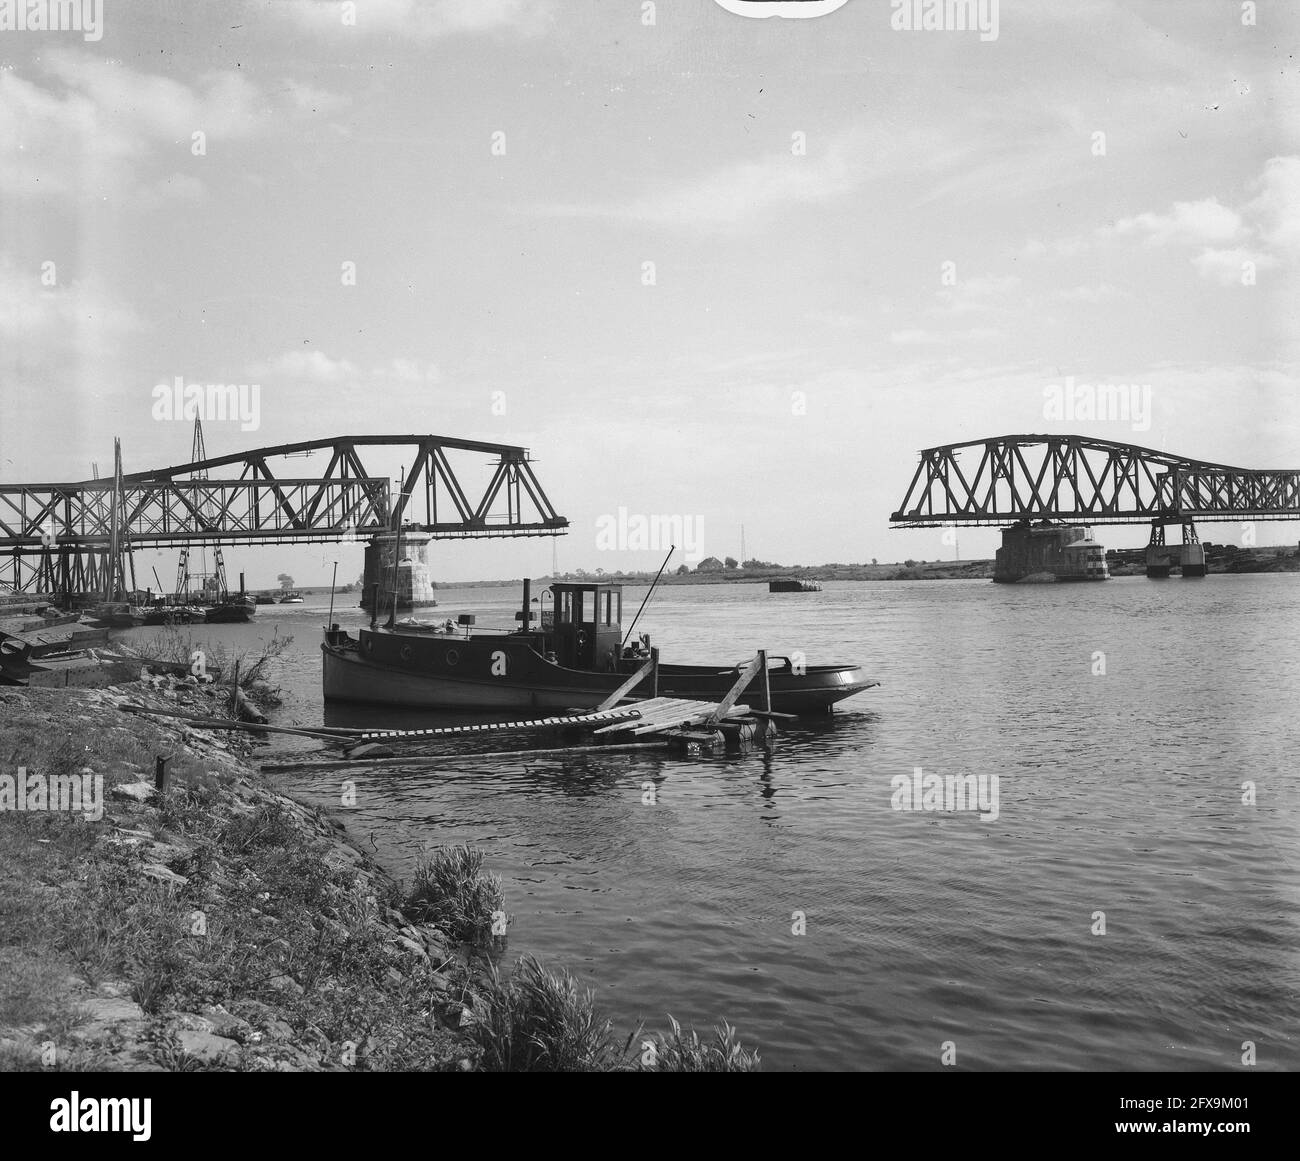 Bridge at Hedel, September 23, 1946, BRUG, The Netherlands, 20th century press agency photo, news to remember, documentary, historic photography 1945-1990, visual stories, human history of the Twentieth Century, capturing moments in time Stock Photo